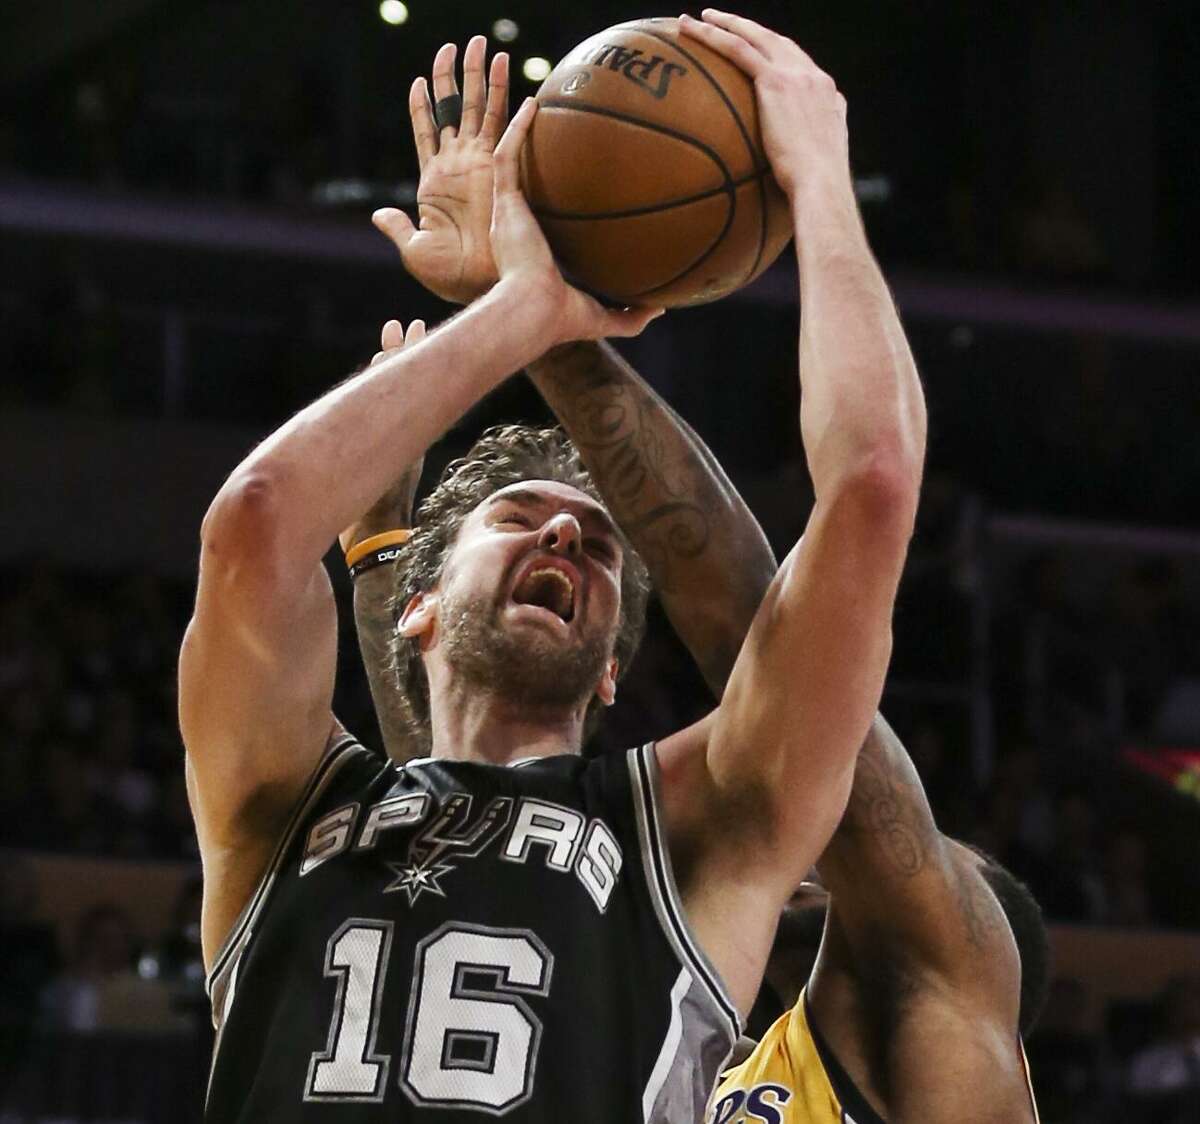 The Spurs are blessed with the depth to make up for the injury absence of center Pau Gasol.